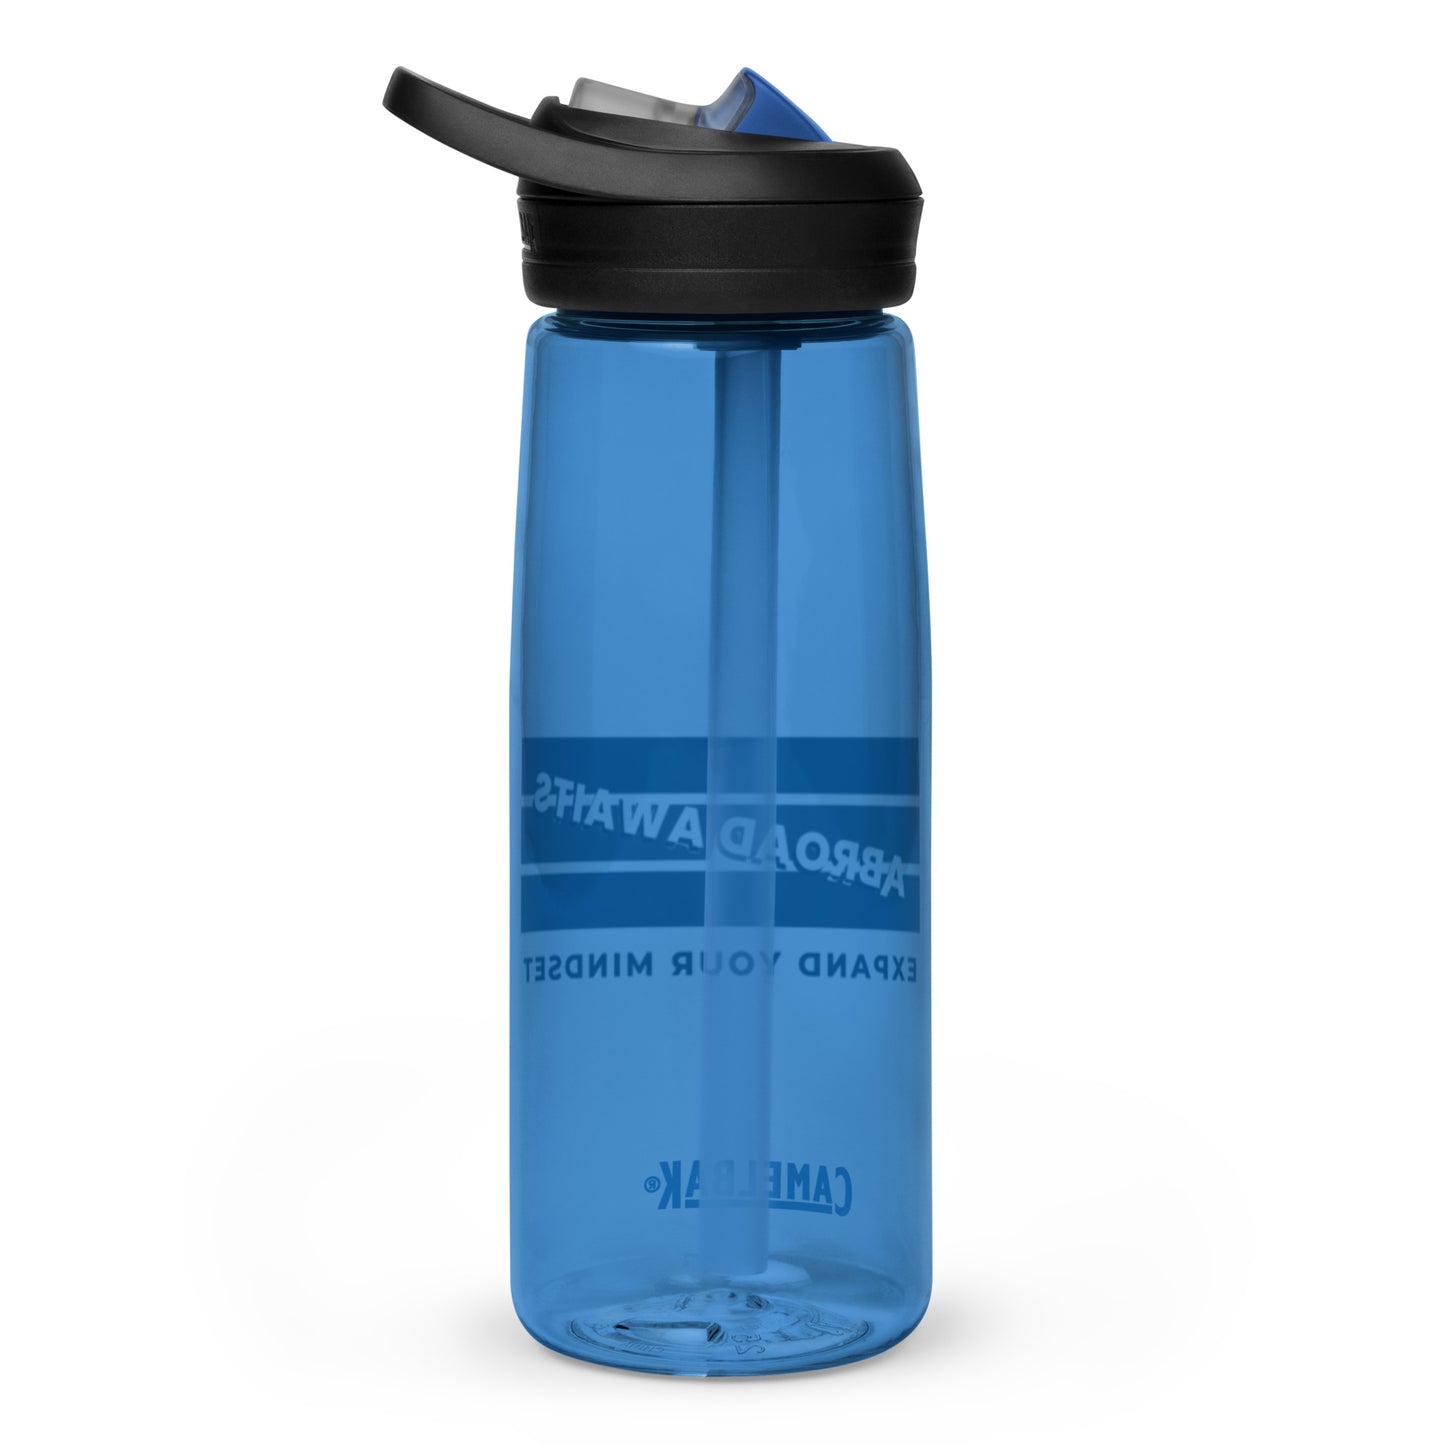 Sports water bottle Abroad Awaits Expand Your Mindest